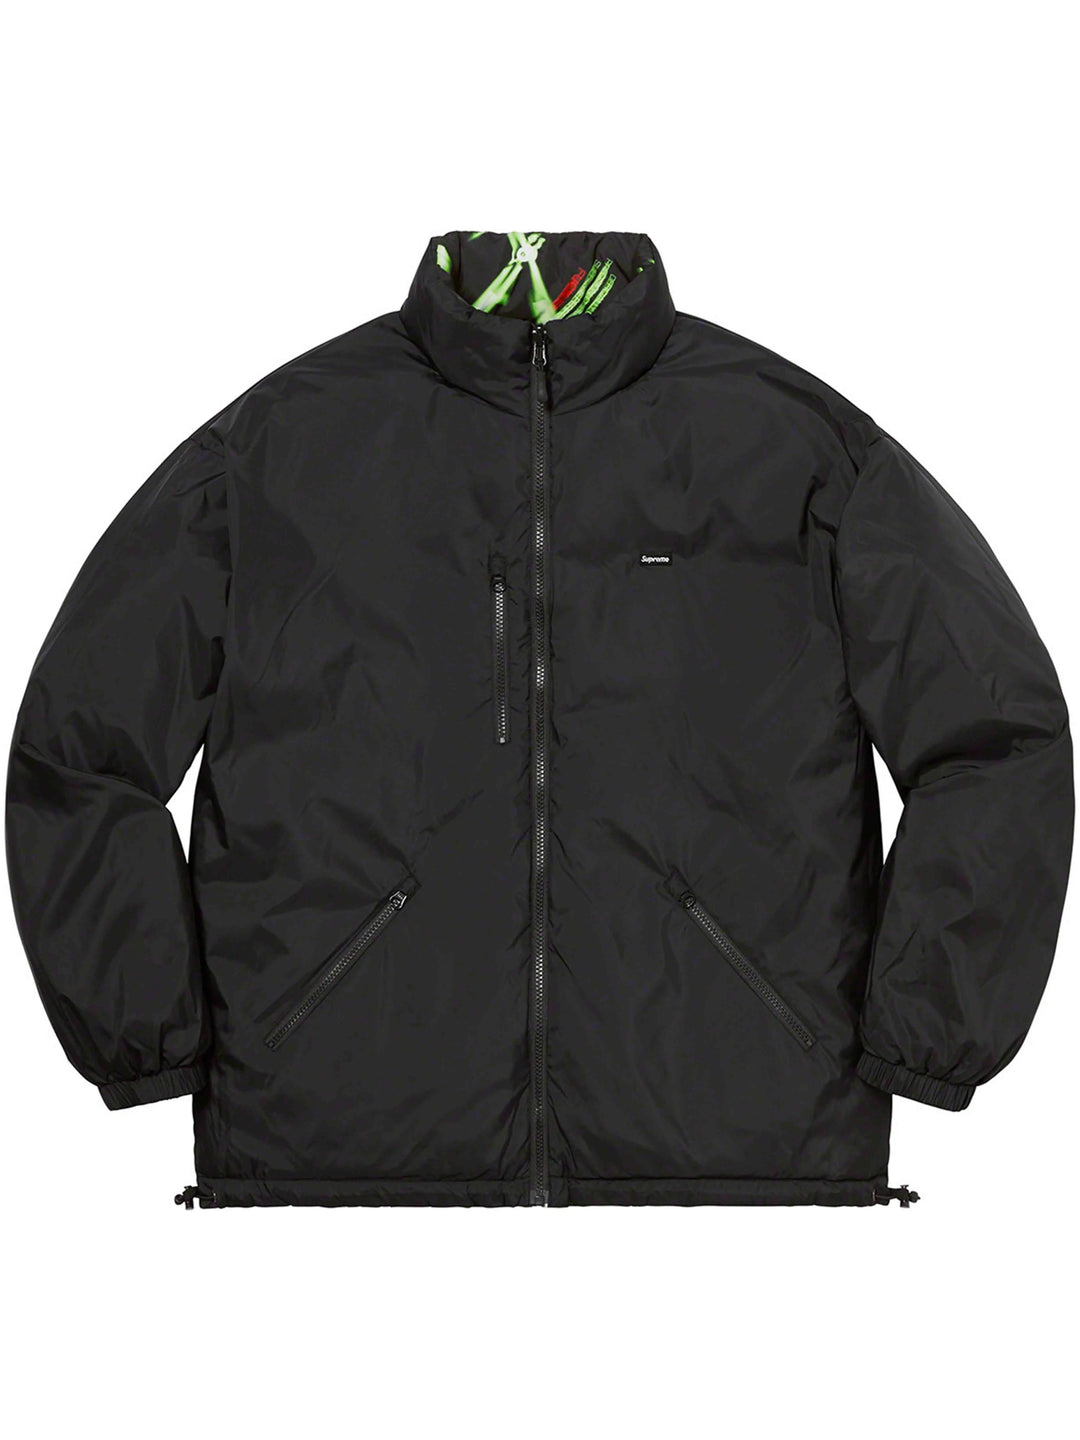 Supreme Watches Reversible Puffer Jacket Black [FW20] Prior